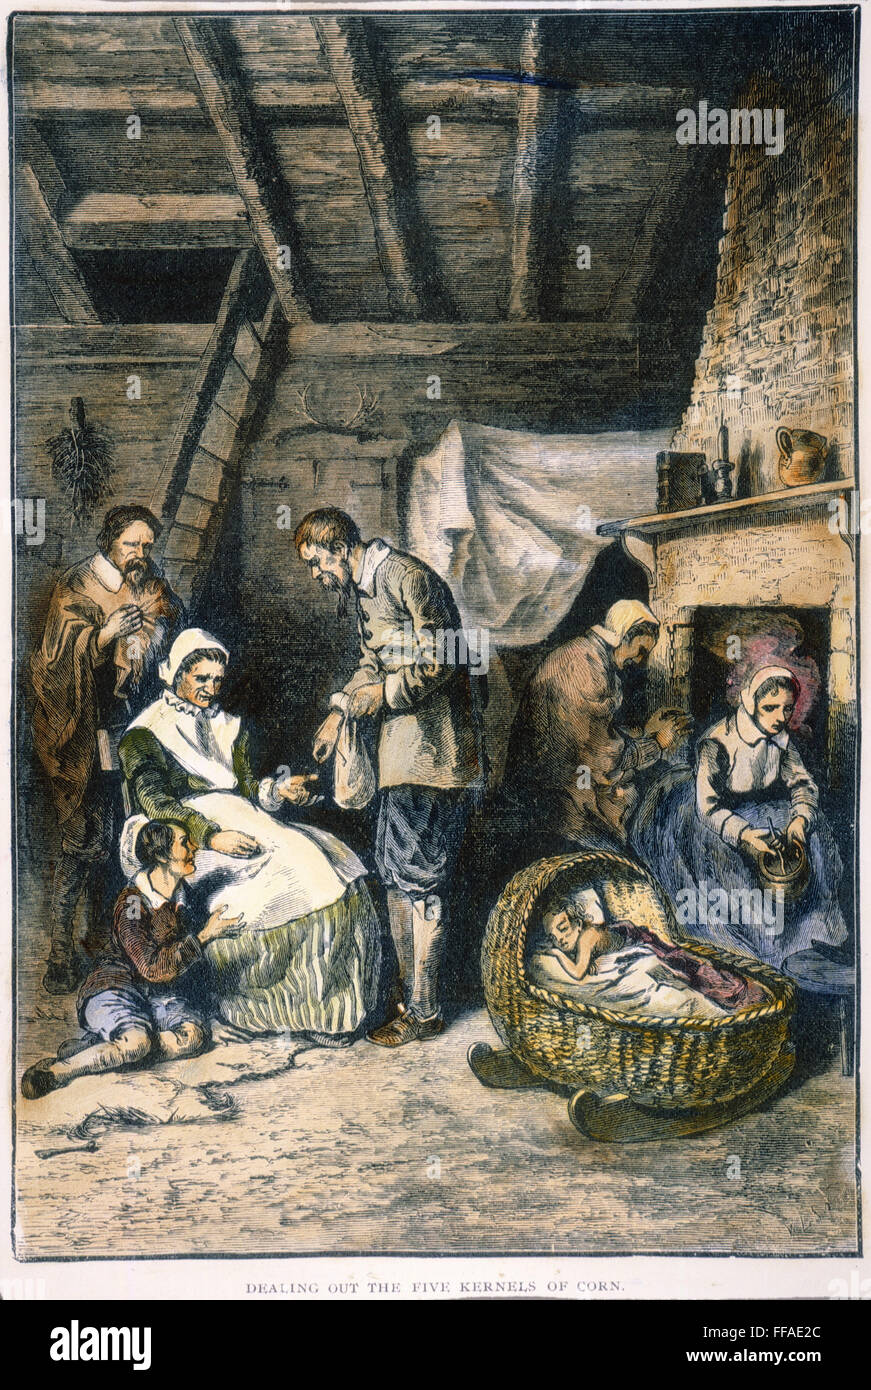 PILGRIMS STARVING. /nDealing out the daily five kernels of corn per person during the starving time in the Plymouth Colony of Massachusetts, Spring 1623. Wood engraving, 19th century. Stock Photo